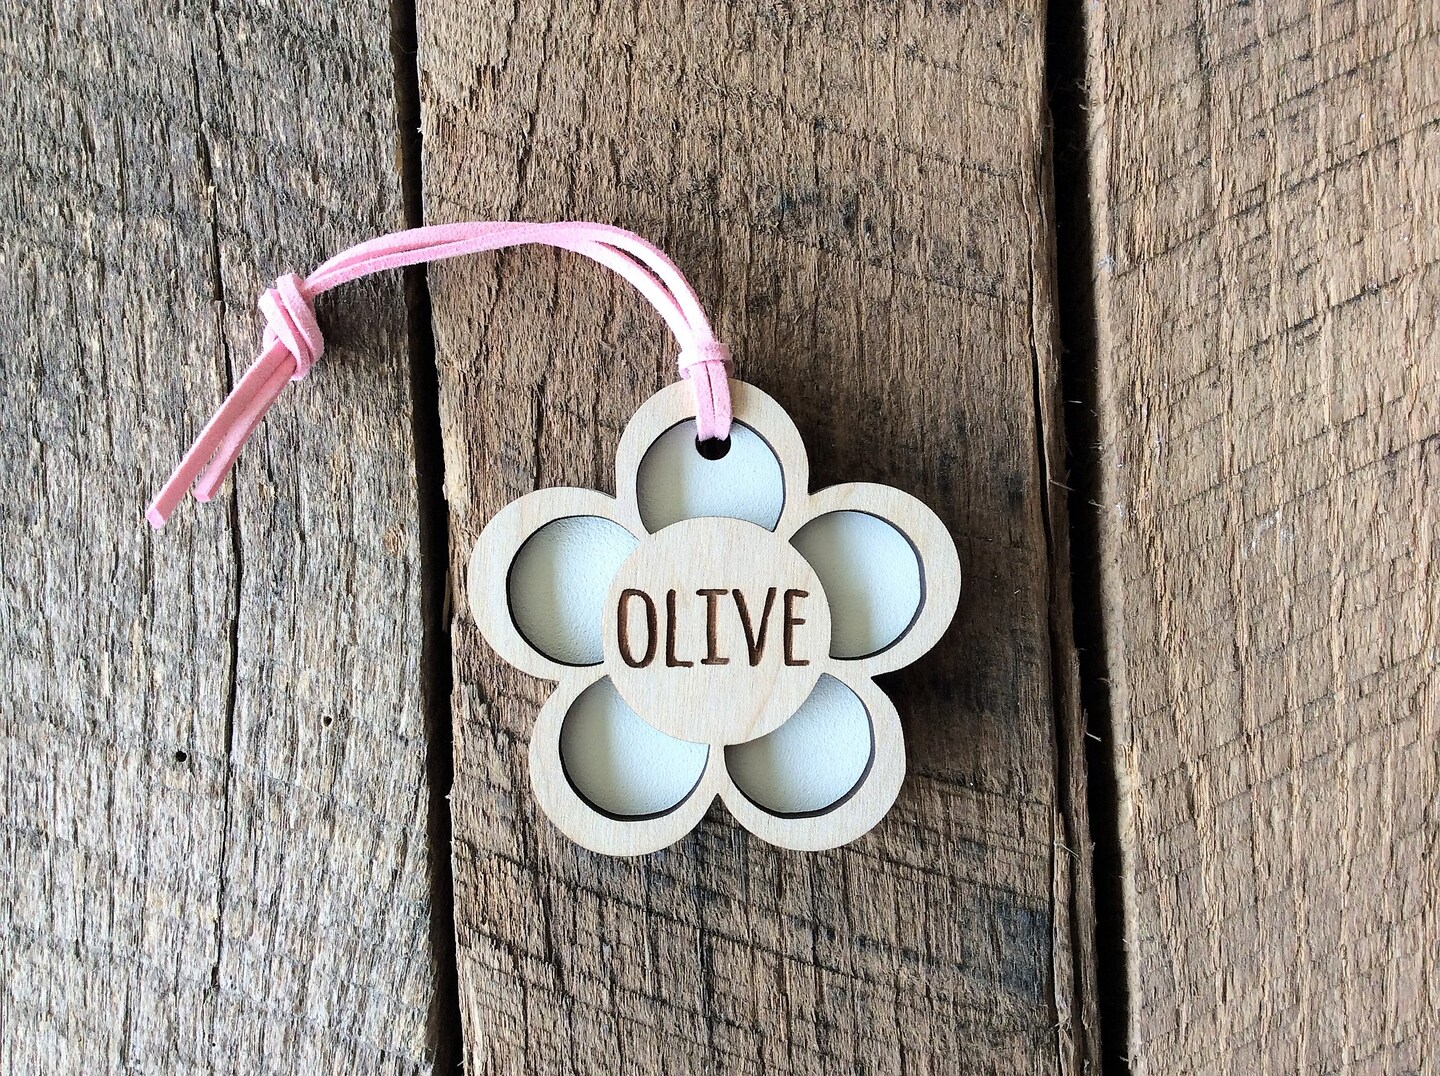 Backpack Tag, Wood Daisy Kids Name Tag, Personalized Flower Bag Tag, Diaper  Bag Tag, Car Charm, Gift Bag Tags